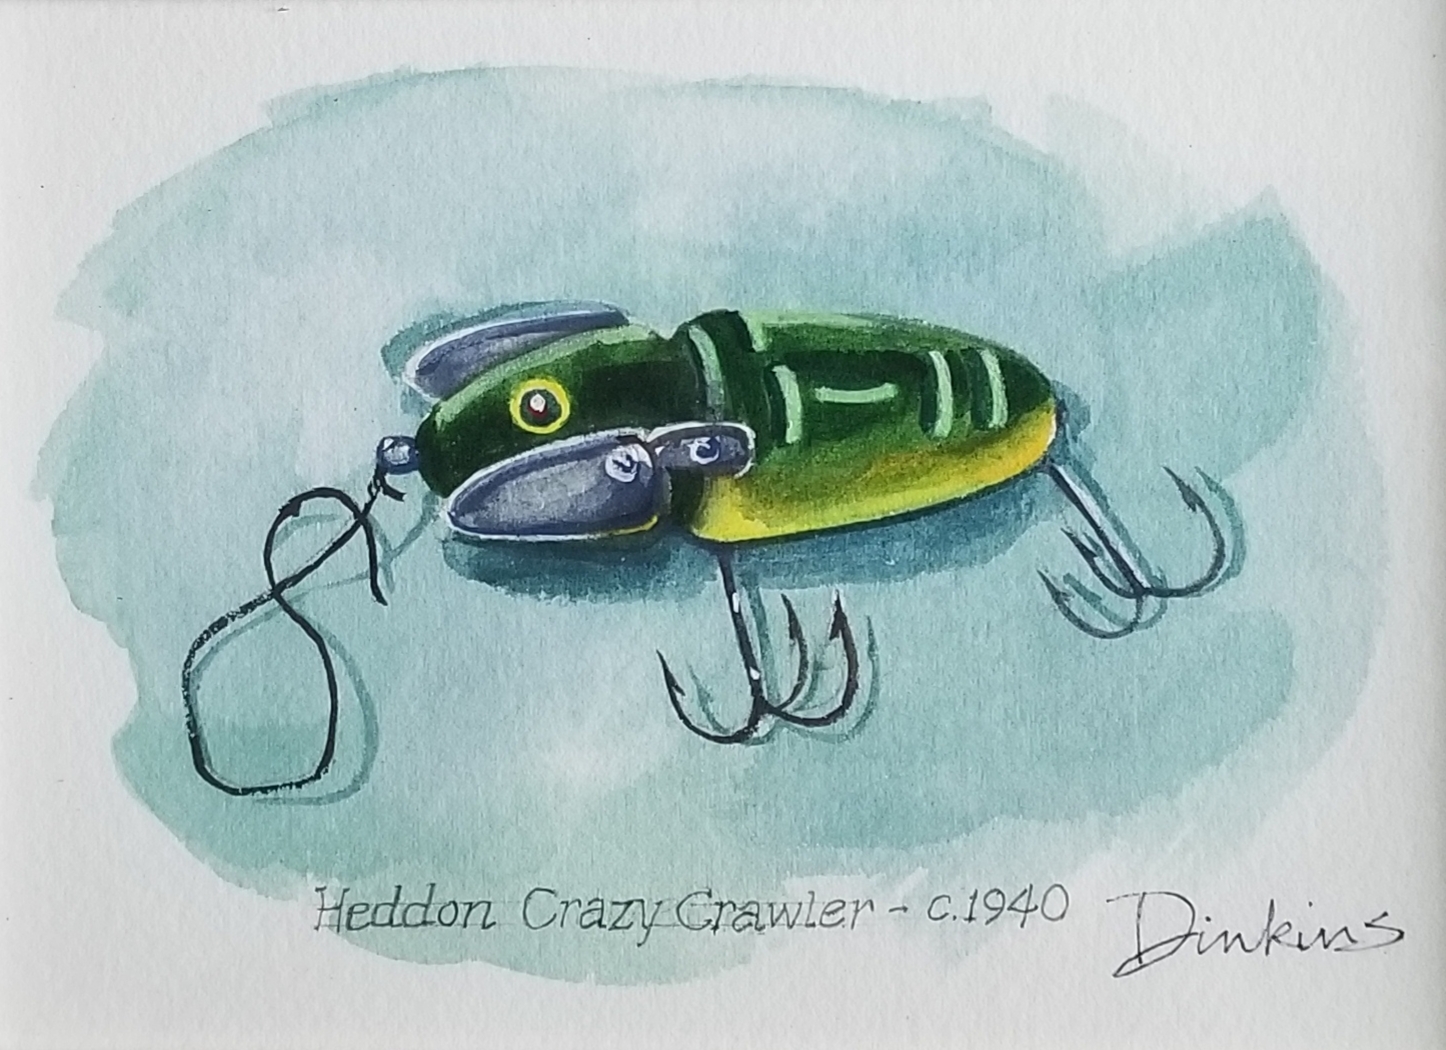 Crazy Crawler, a watercolor painting by William Dinkins